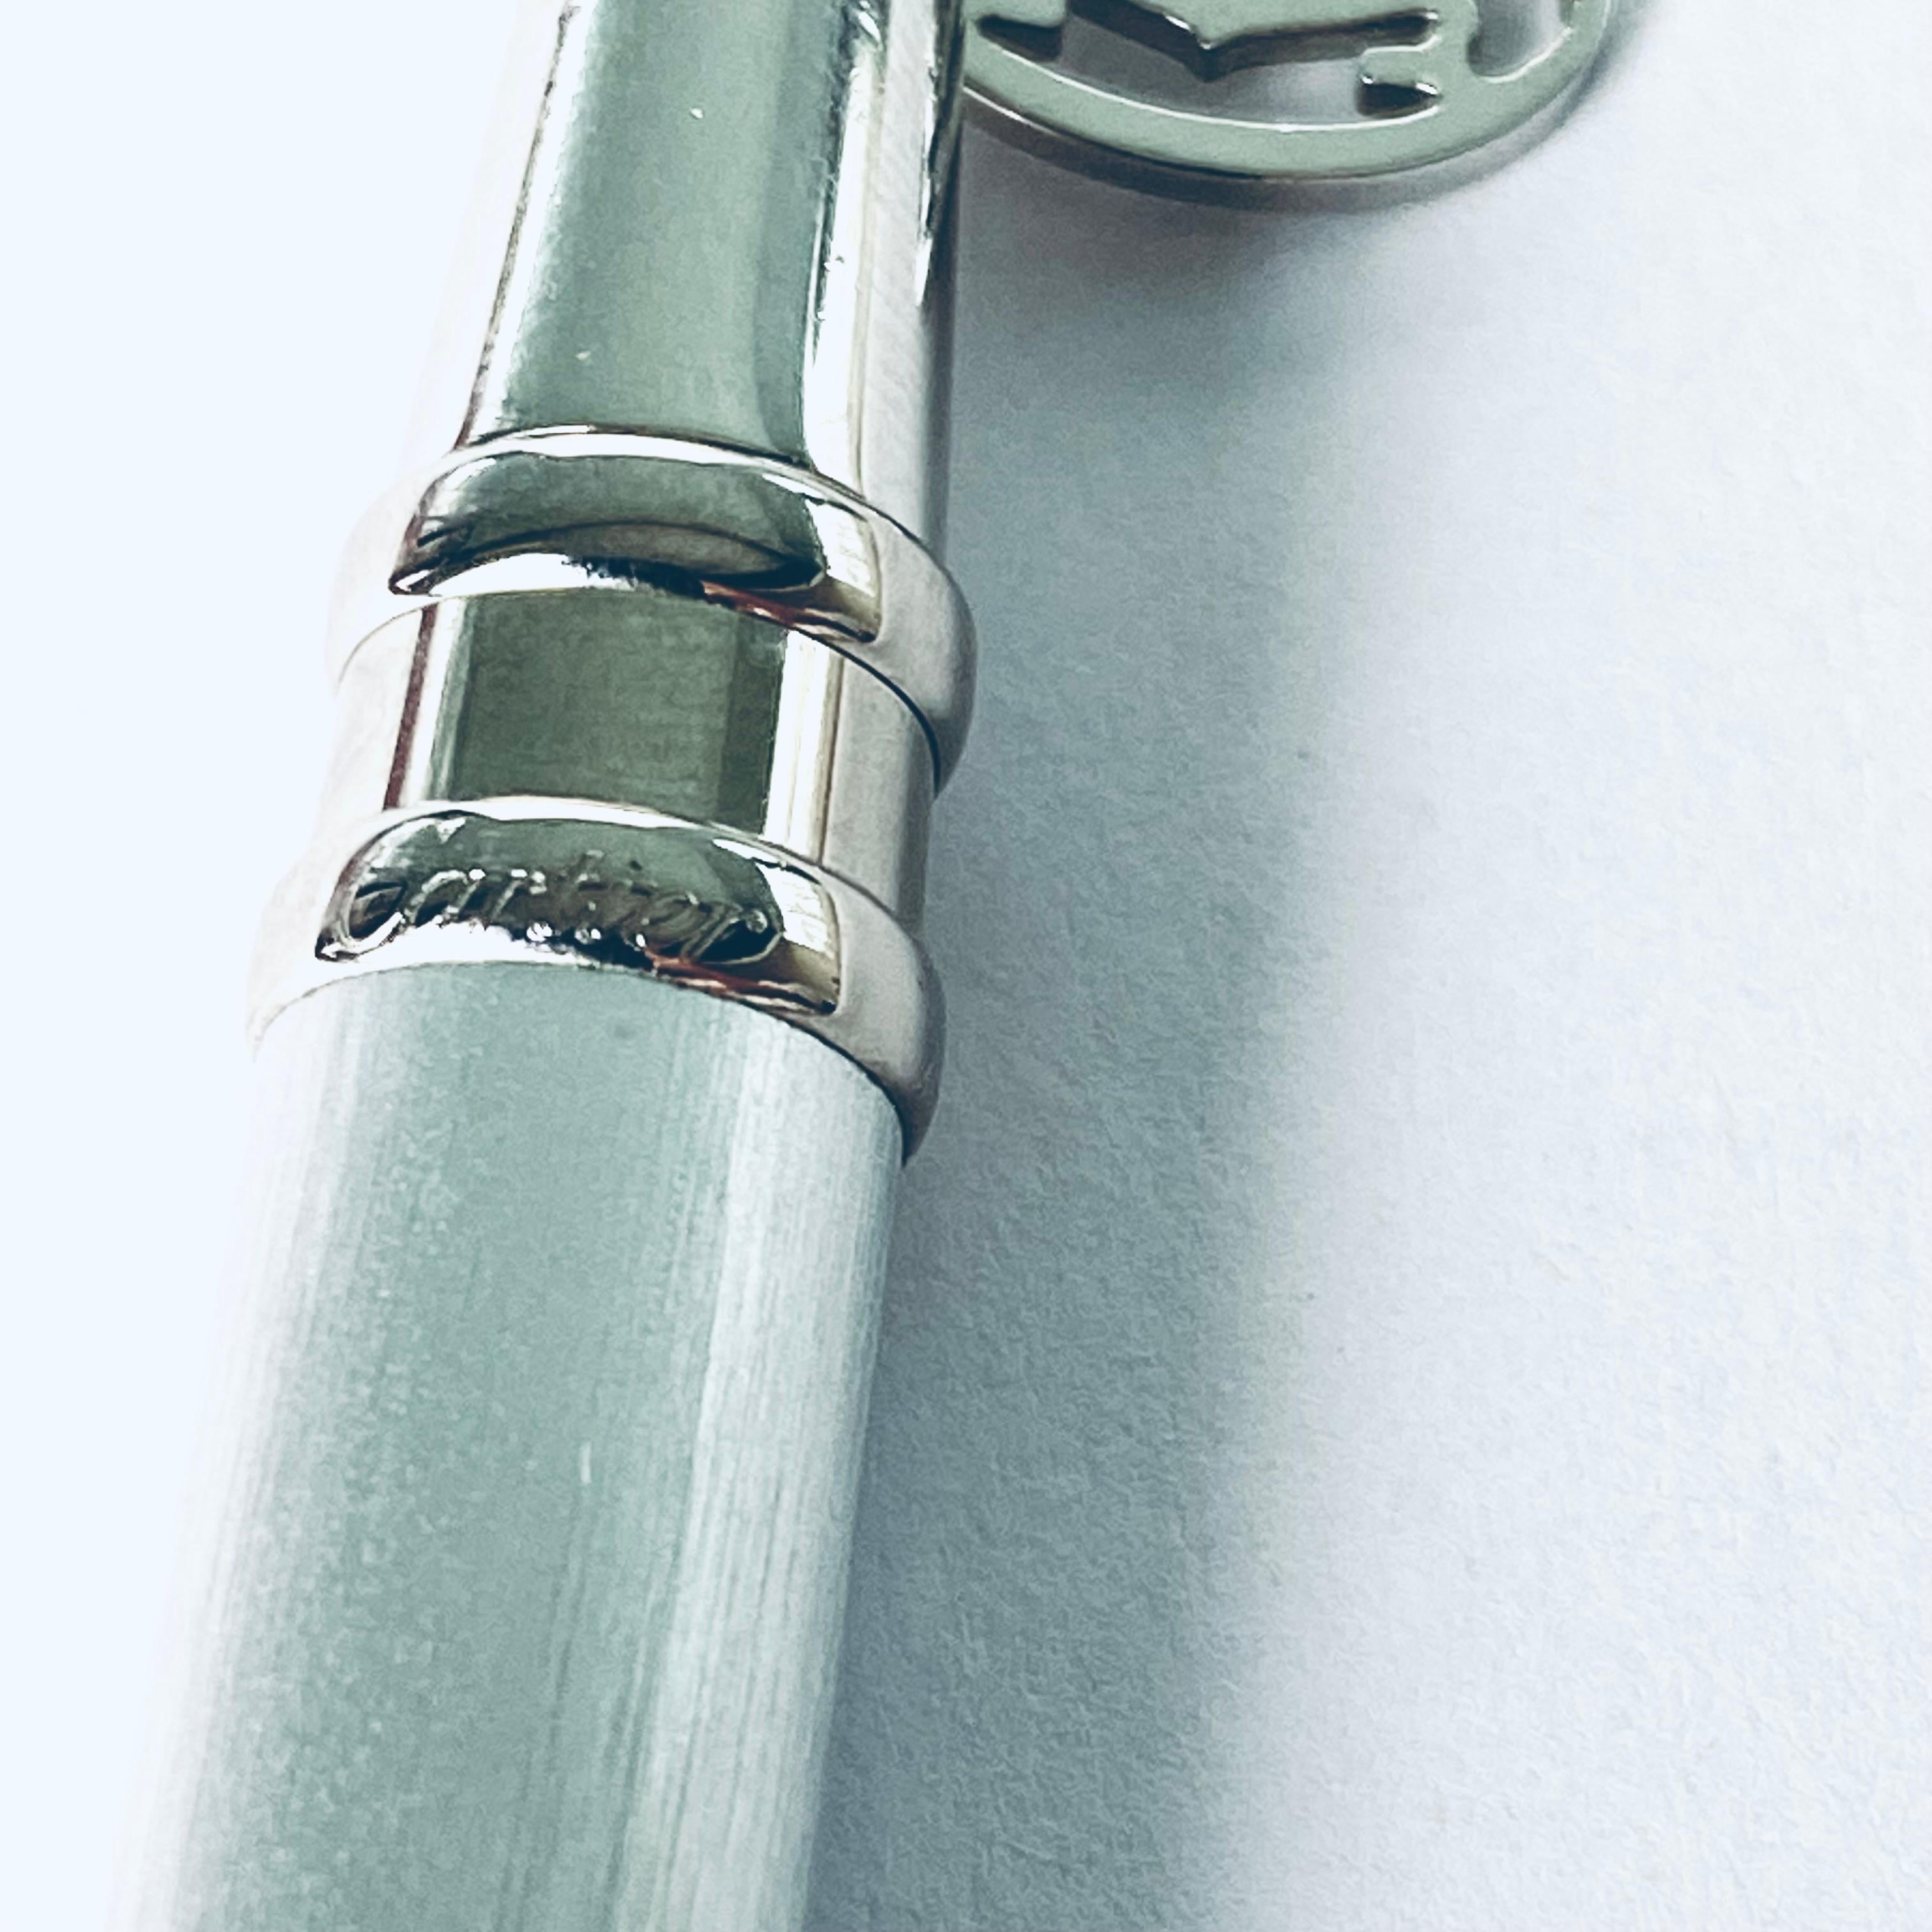 Authentic Must de Cartier Ballpoint Pen with Cartier Charm - A100783
Description:
Elevate your writing experience with the timeless elegance of the Must de Cartier Ballpoint Pen, adorned with a distinctive Cartier charm marked A100783. This